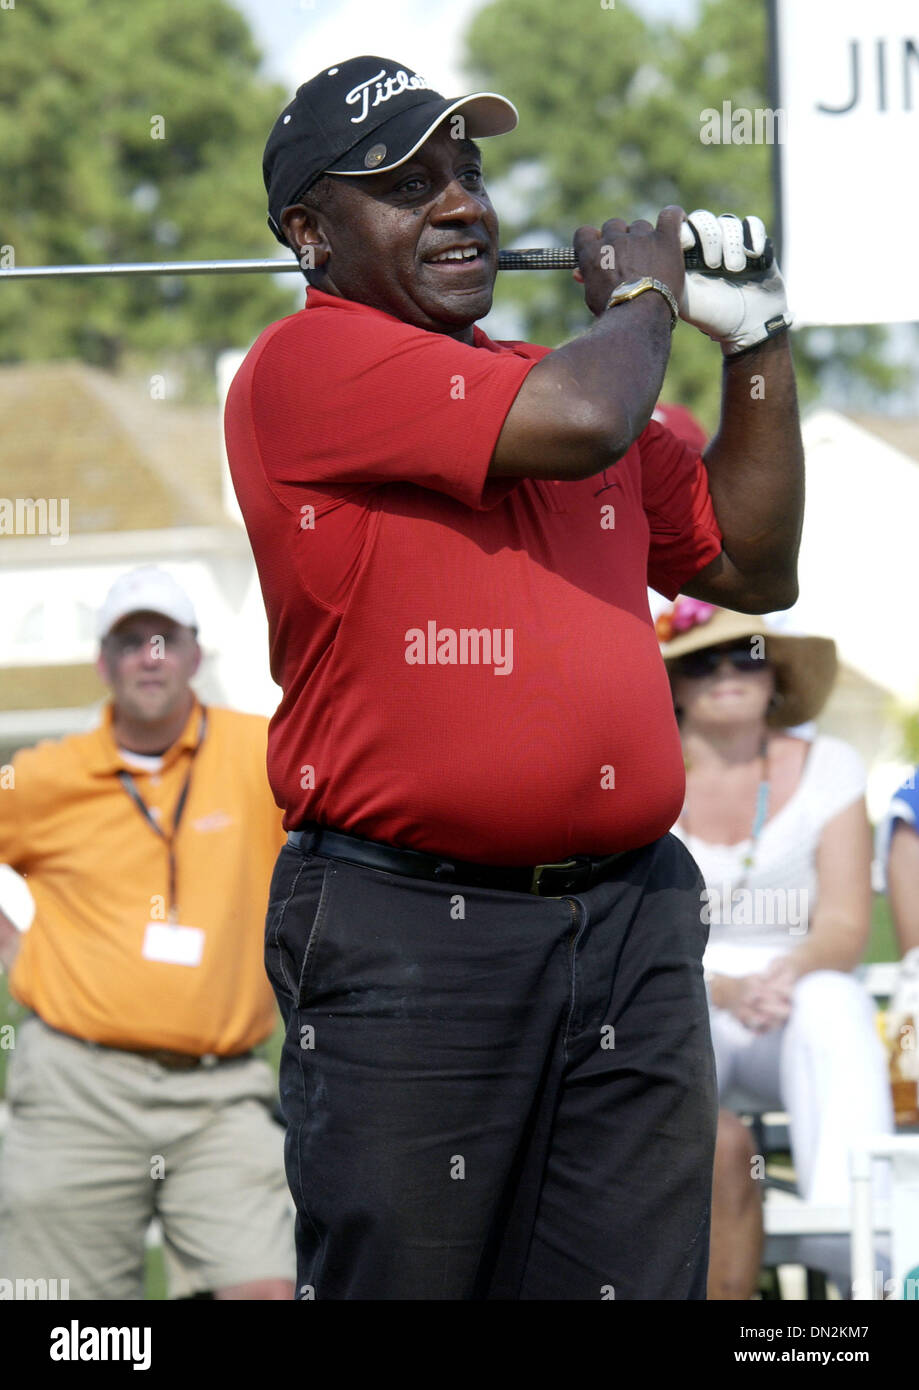 Aug 27, 2006; Raleigh, NC, USA; Retired NFL Football Player Baltimore Colts HOWARD M. STEVENS JR. makes an appearance at the 2006 Jimmy V Celebrity Golf Classic that took place at Prestonwood Country Club located in Cary. The Jimmy Valvano Foundation has raised over 12 million dollars to help benefit cancer research. Coach Jim Valvano passed away in 1993 from cancer and was the hea Stock Photo